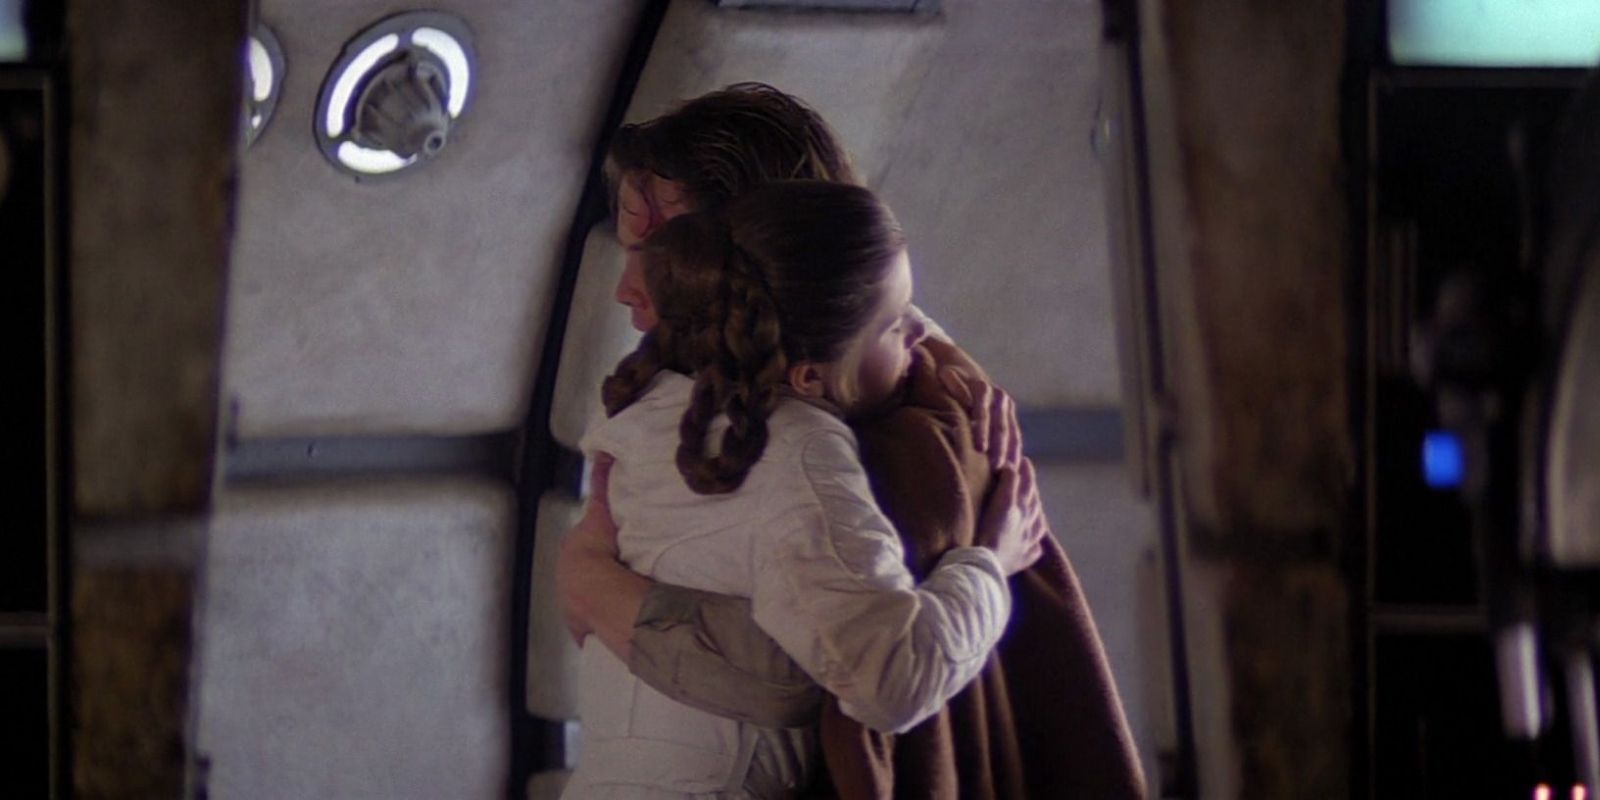 Luke Skywalker and Leia Organa reunite and embrace in Star Wars Empire Stikes Back